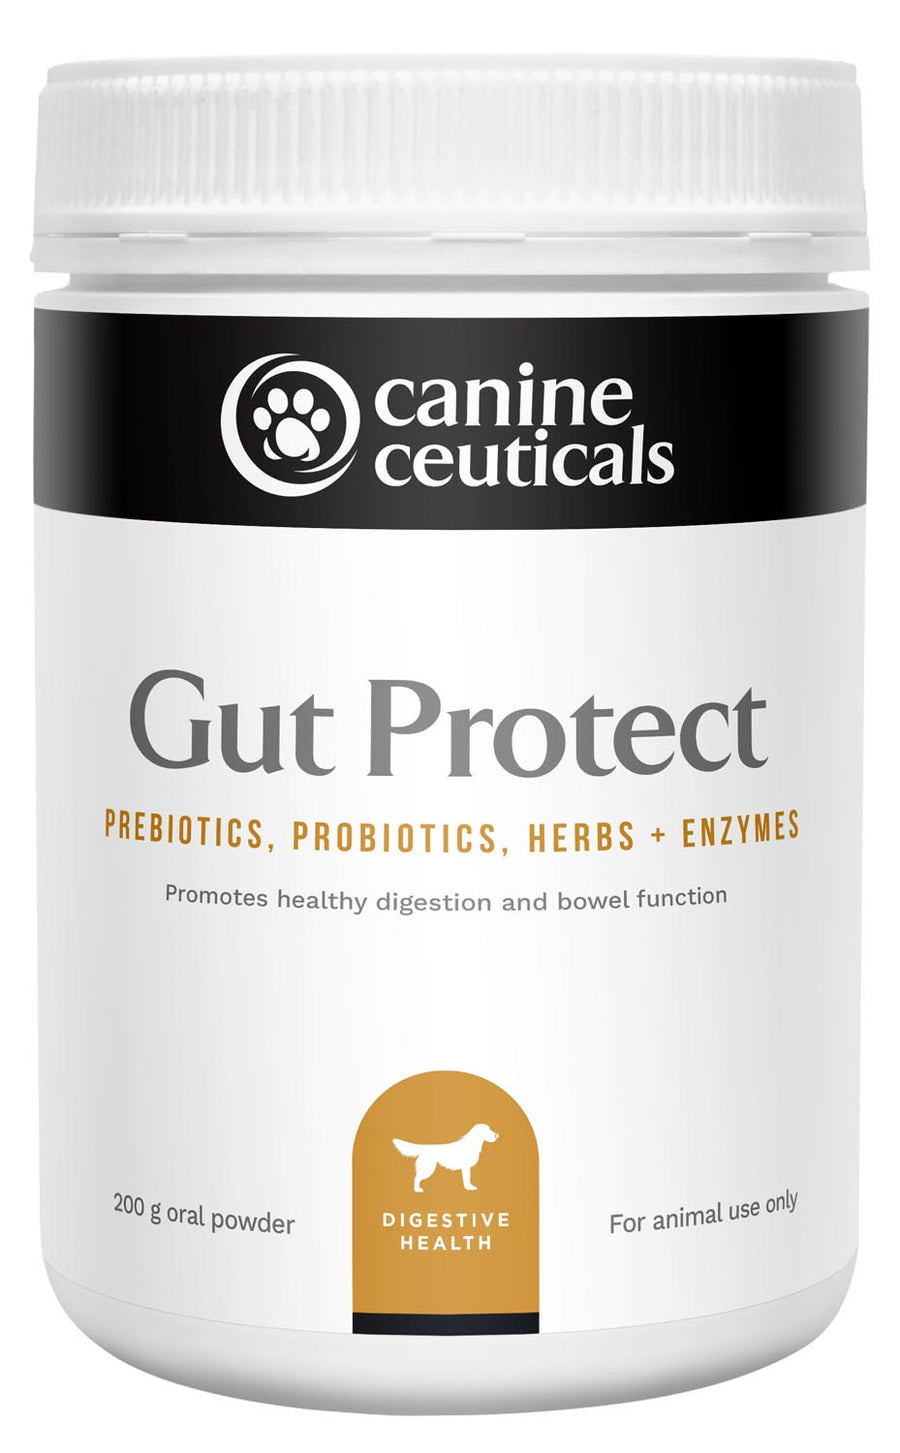 Canine Ceuticals Gut Protect